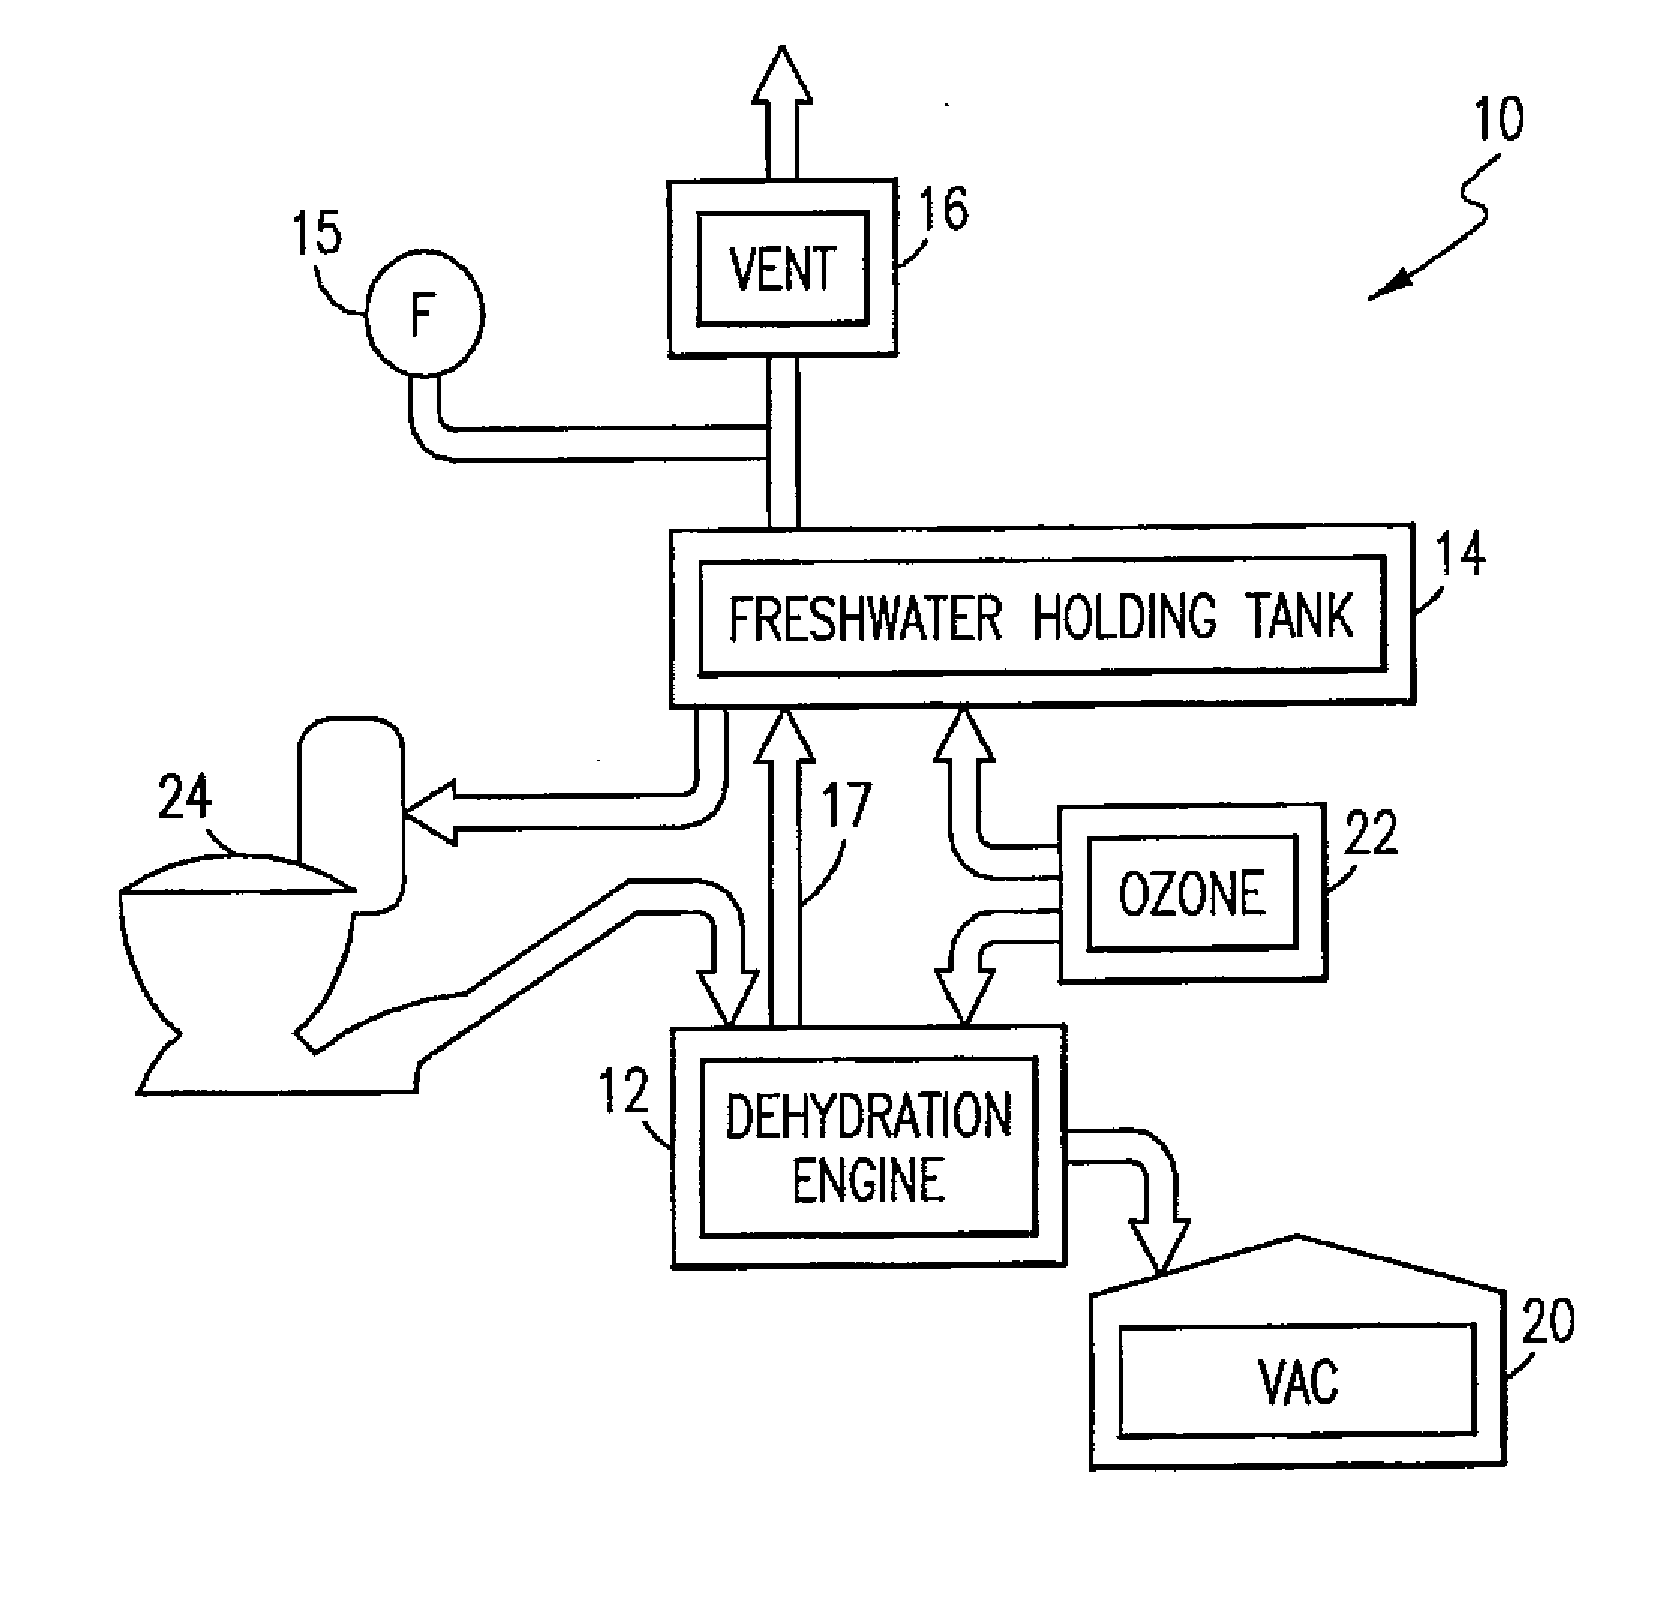 Mobile or stationary modular self-contained dehydration toilet, dehydration engine, and gray water recovery system